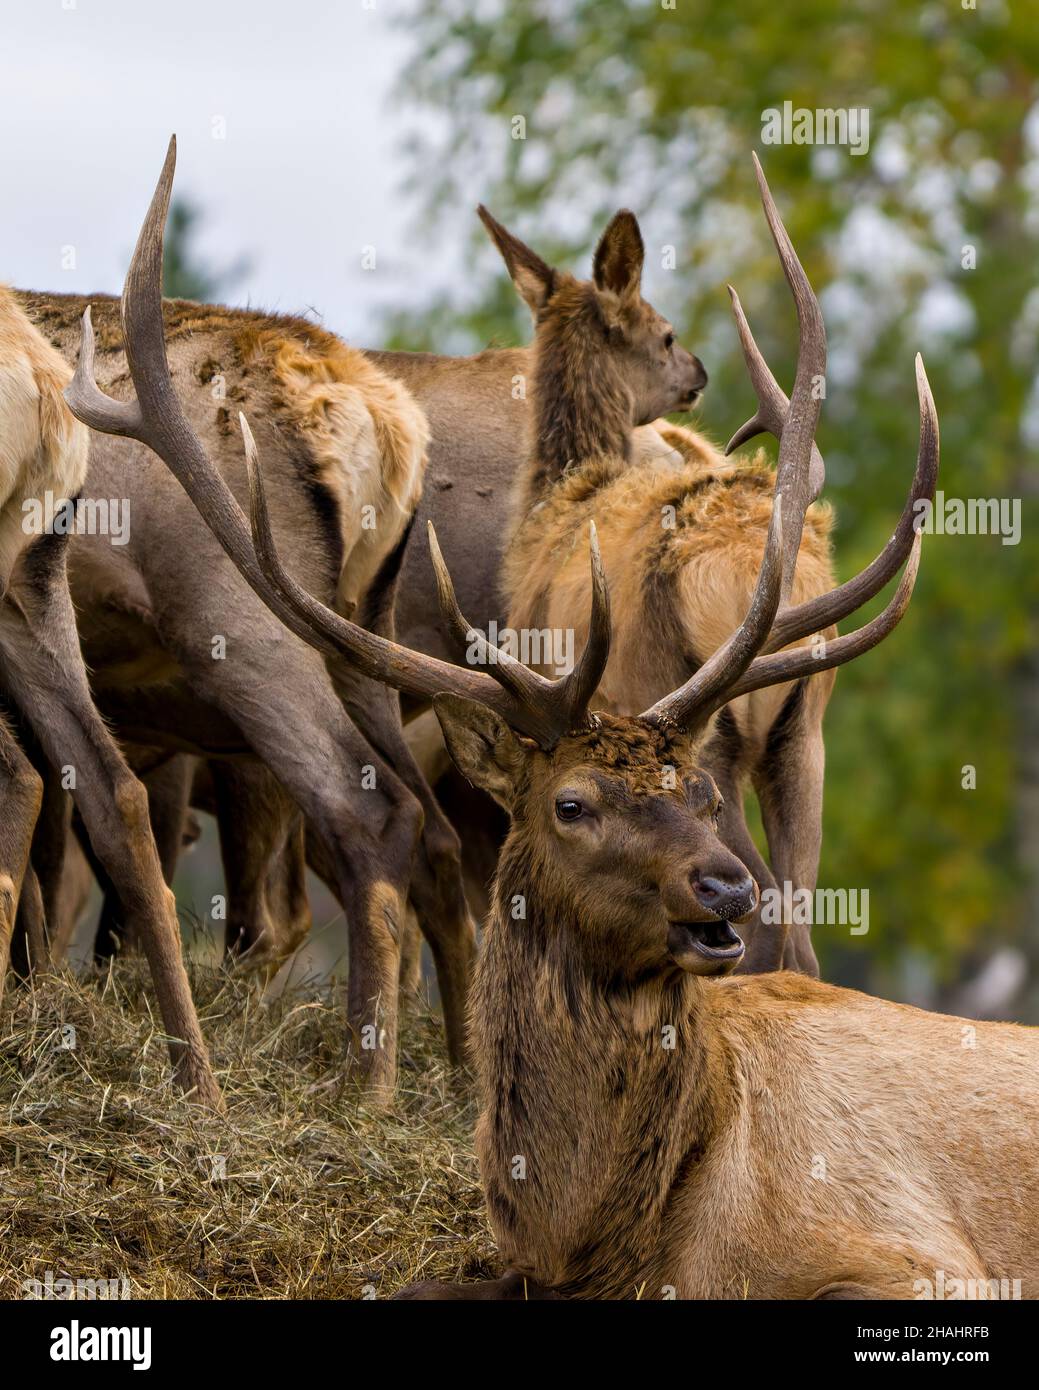 Elk bull bugling and resting on hay with its cows elk around him in their environment and habitat surrounding. Red Deer Image. Stock Photo